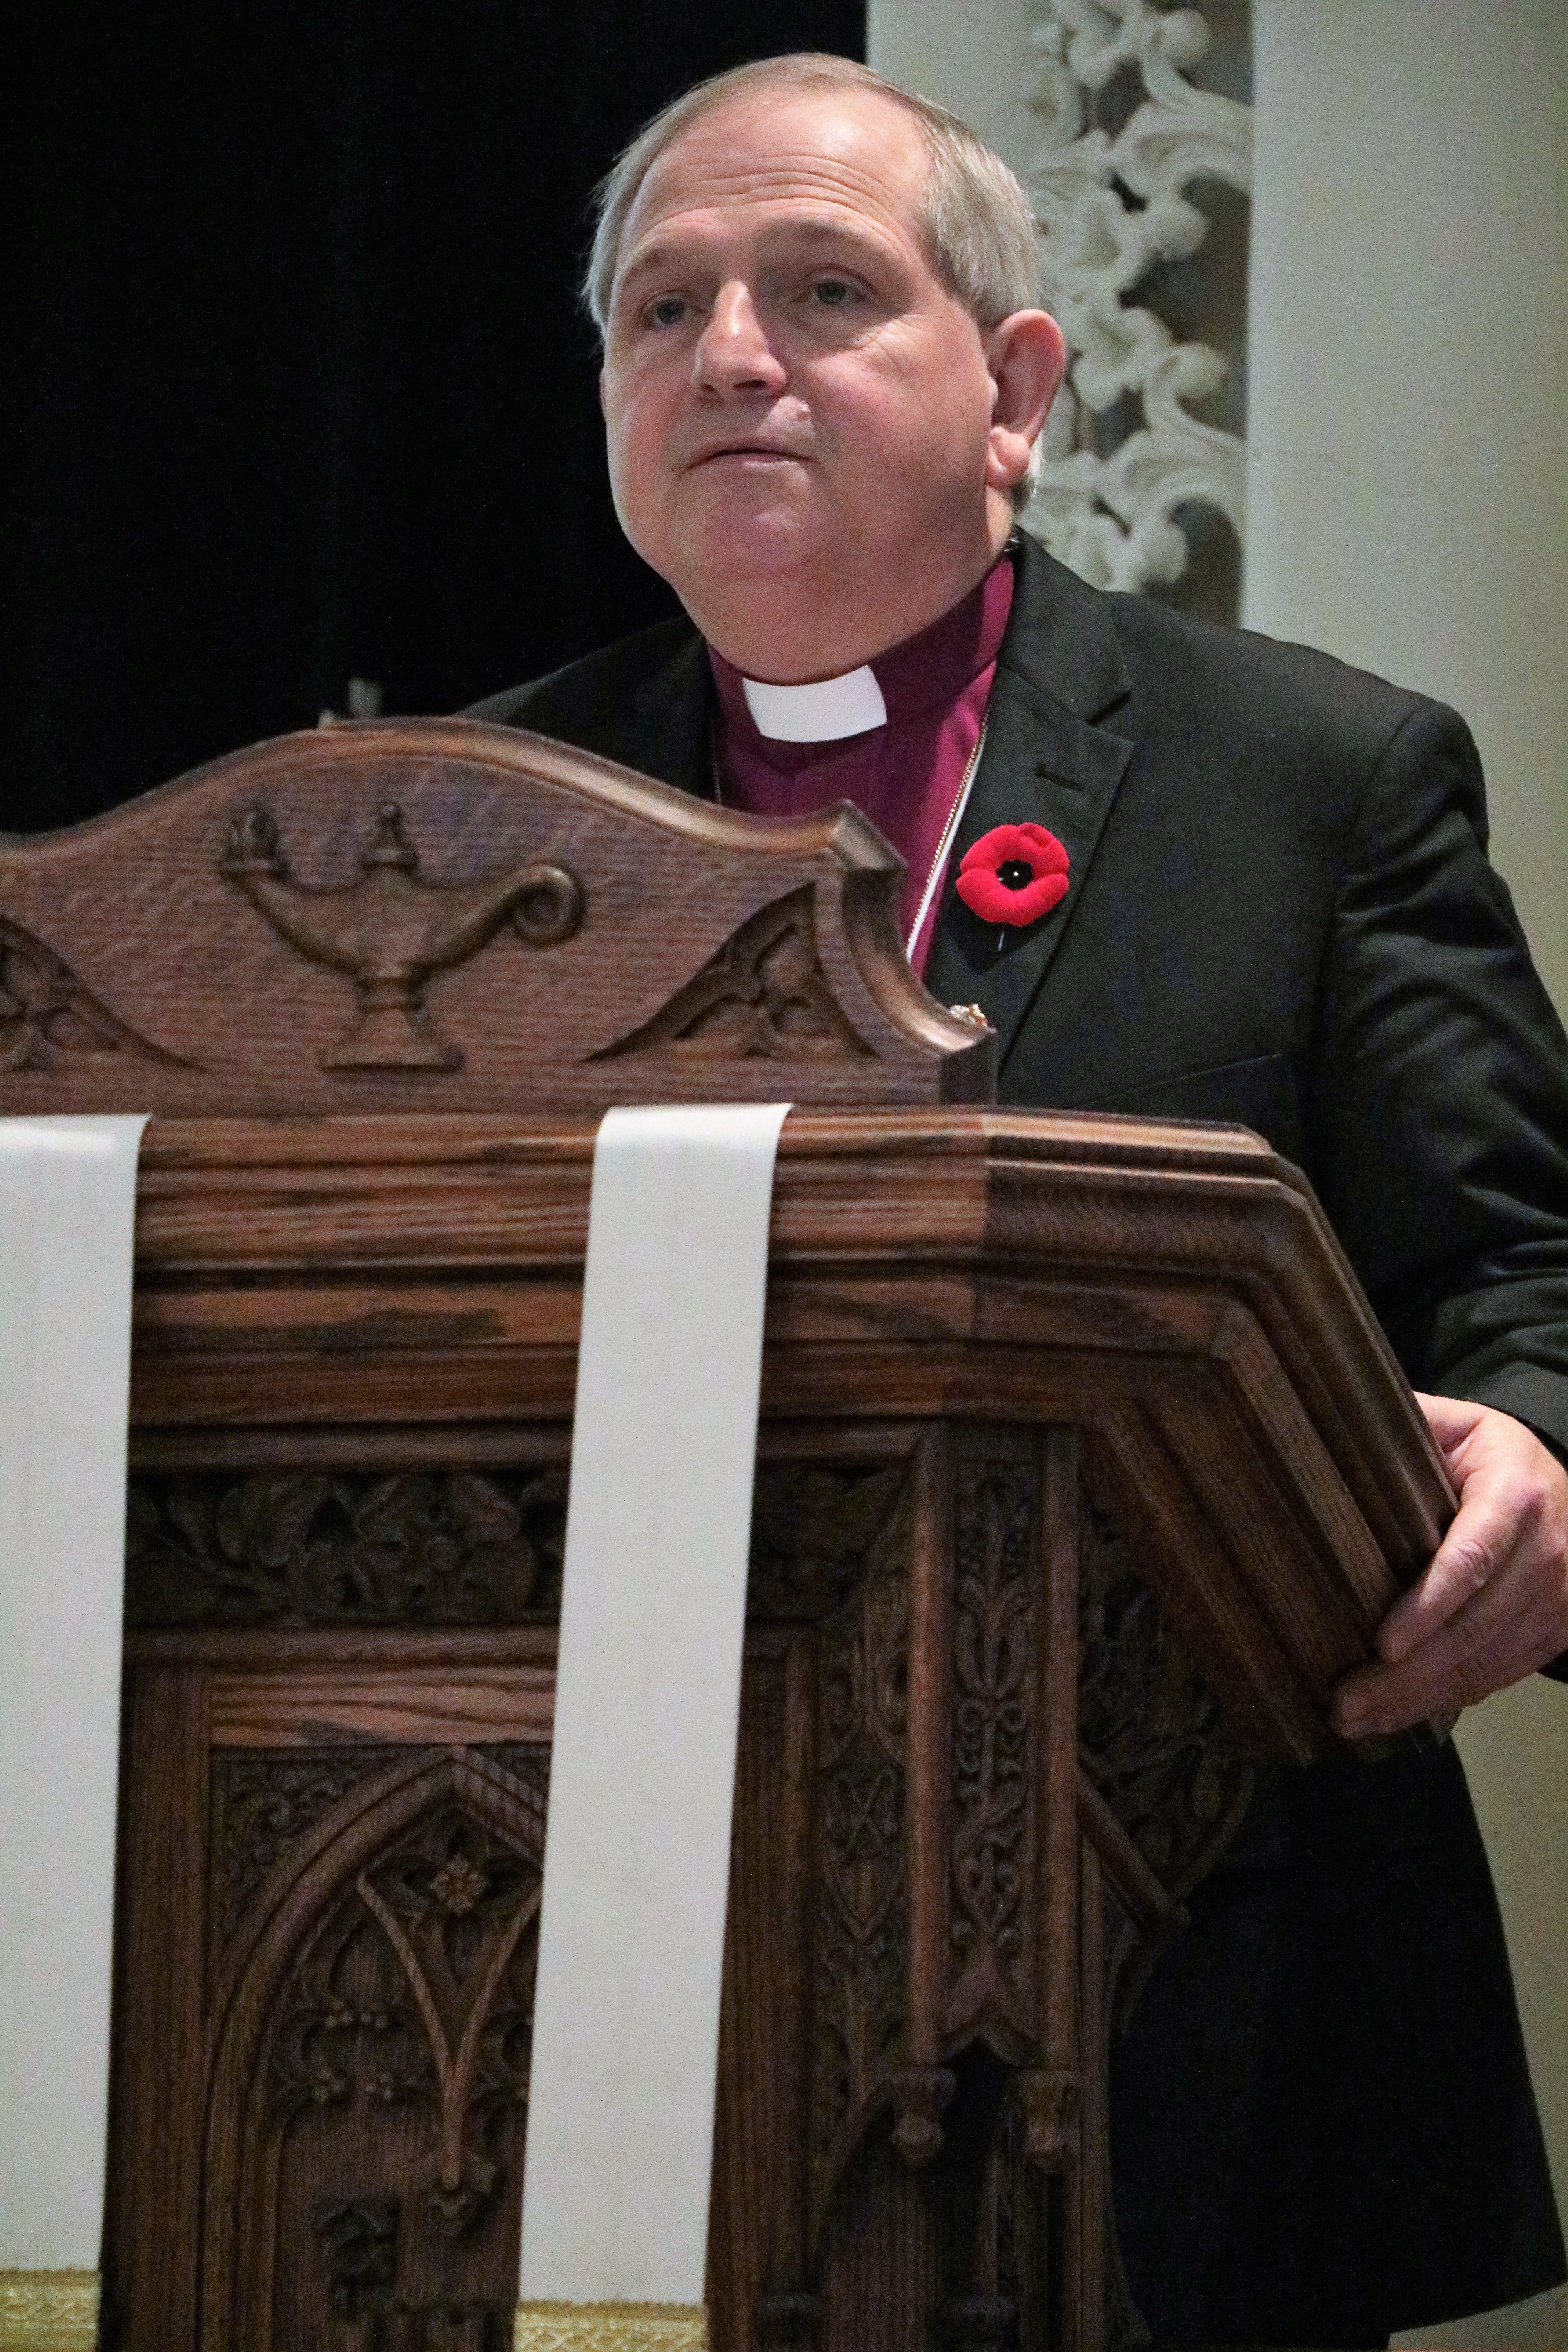 Bishop Michael chose the recent Synod to share his pathways leading to his decision about approving same gender marriages.